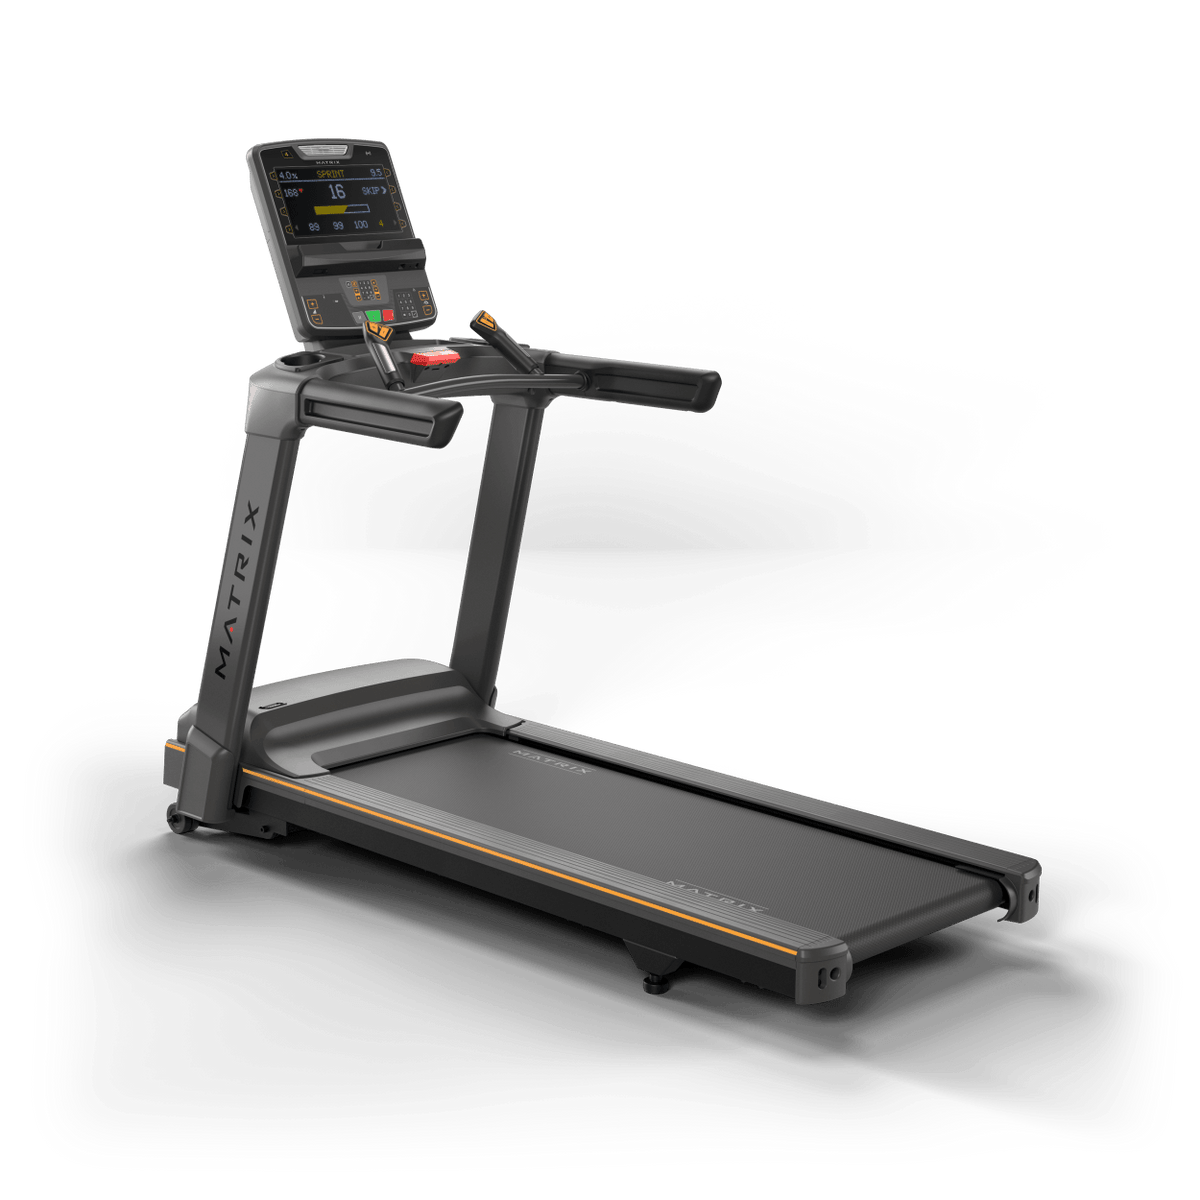 Matrix Fitness Lifetstyle Treadmill with Premium LED Console front view | Fitness Experience